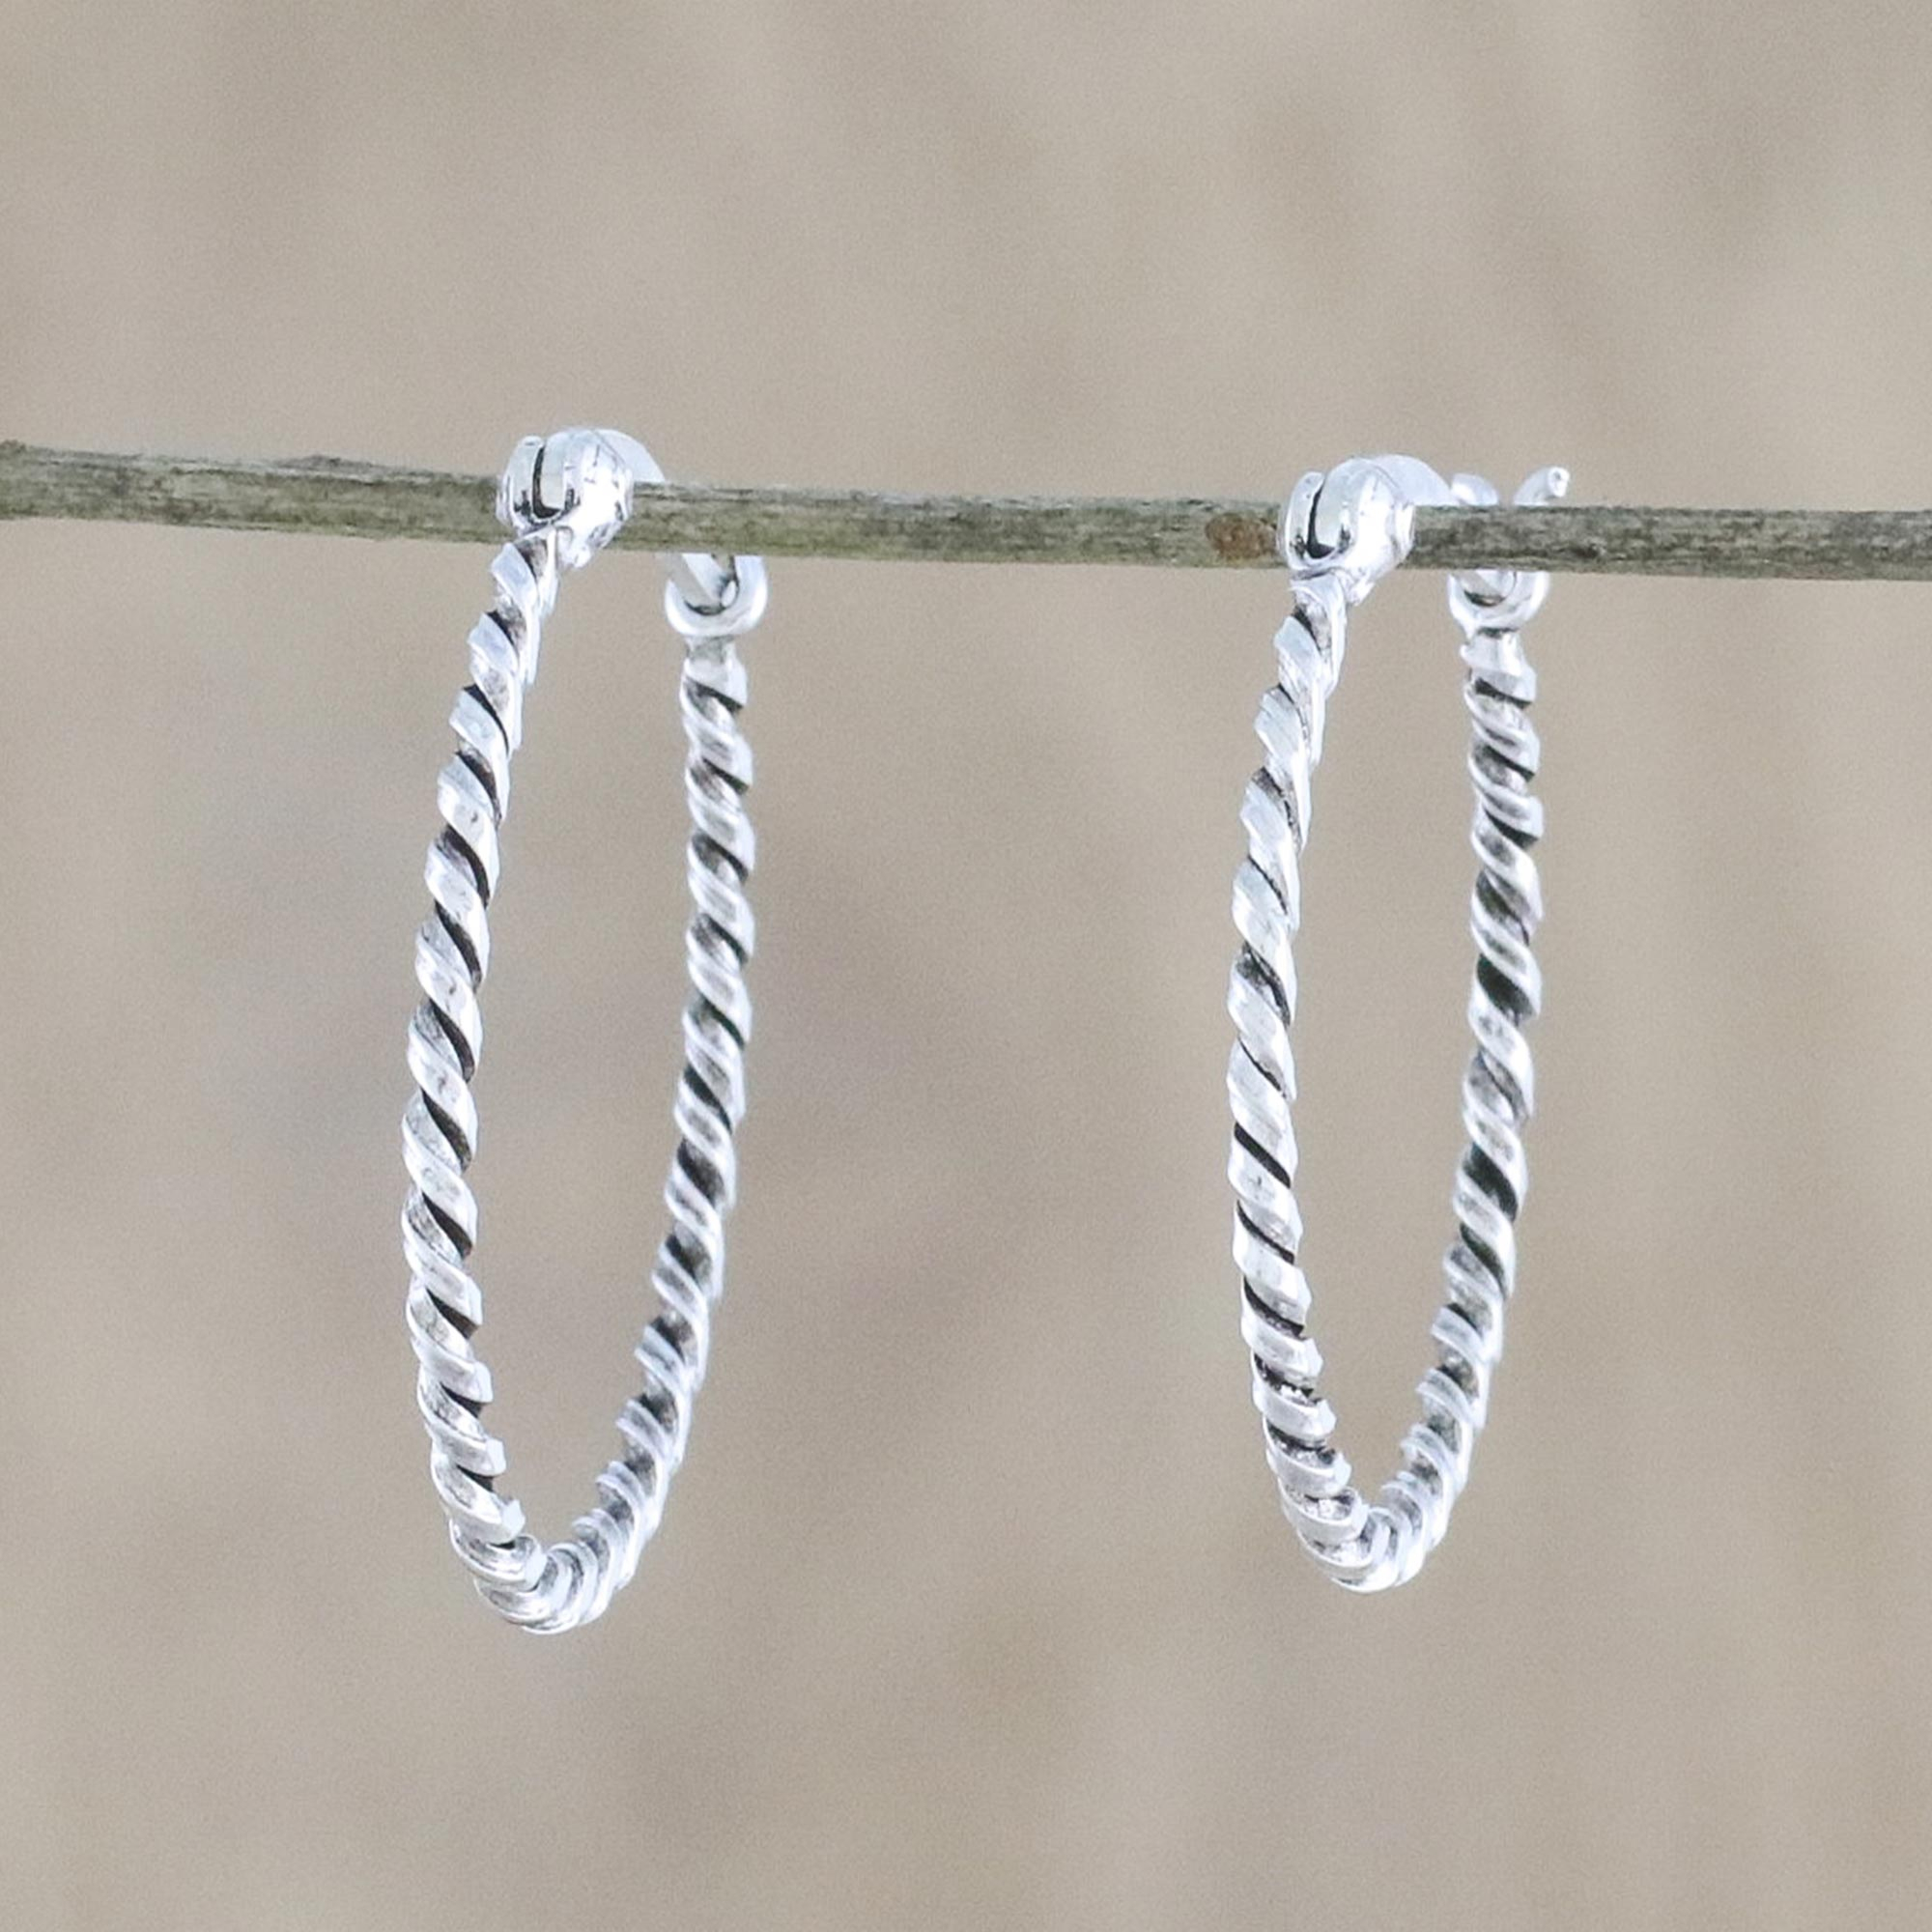 Enchanting Artisan Made Sterling Twisted Wire Earrings With Pearls